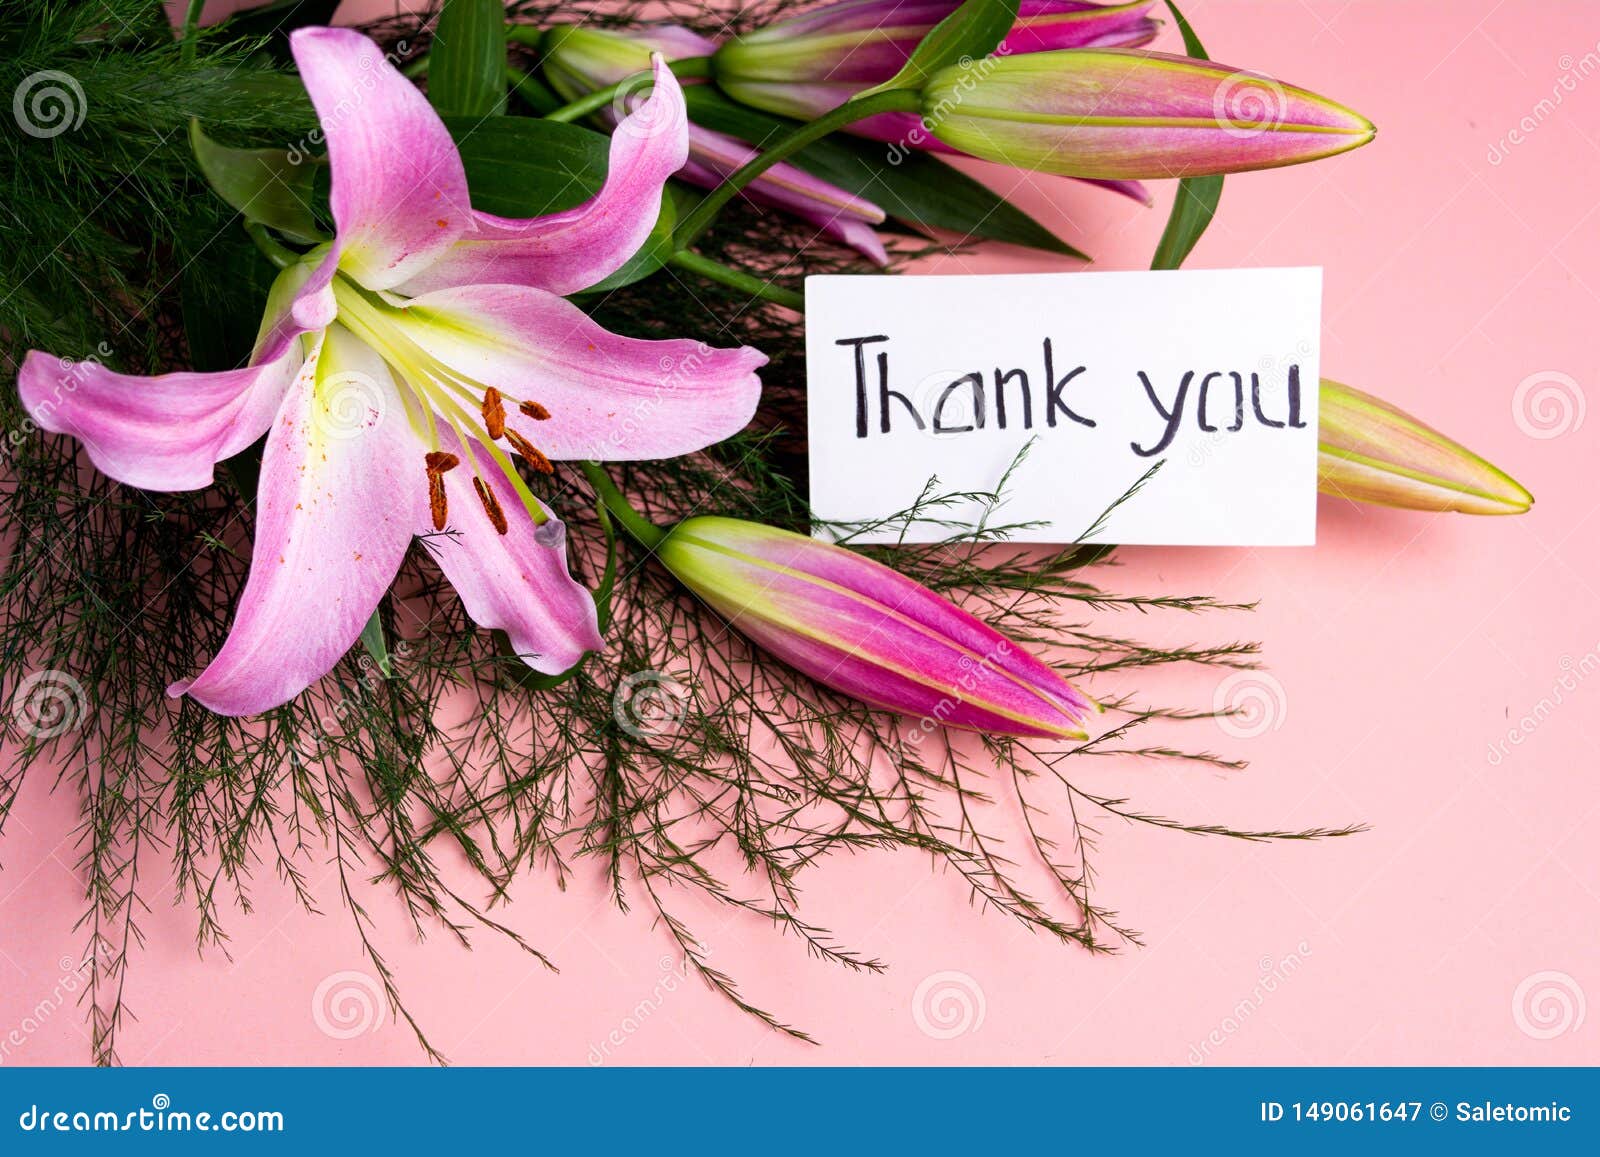 3 242 Thank You Flowers Bouquet Photos Free Royalty Free Stock Photos From Dreamstime